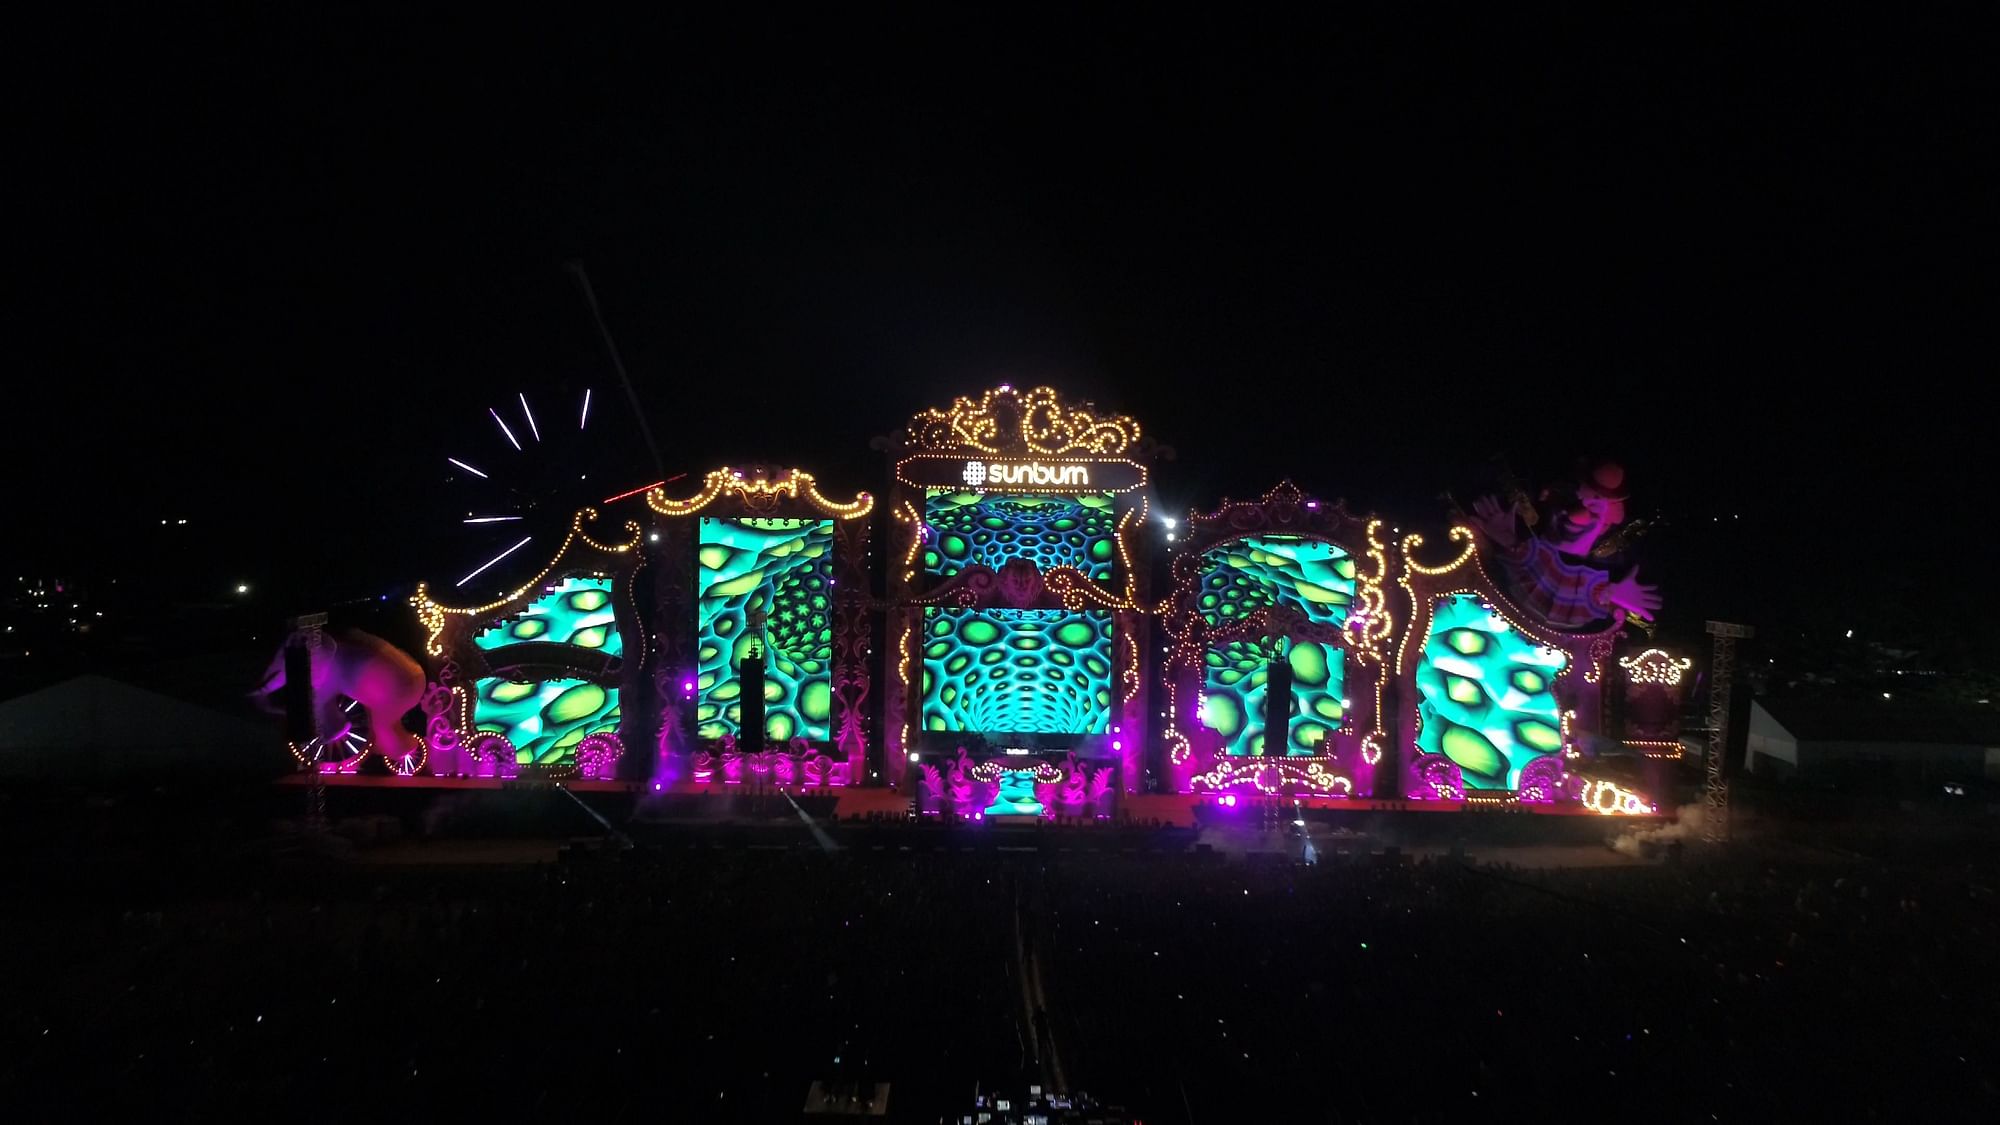 We took the OPPO Reno2 with us to the Sunburn Festival in Goa and were super impressed with its performance.